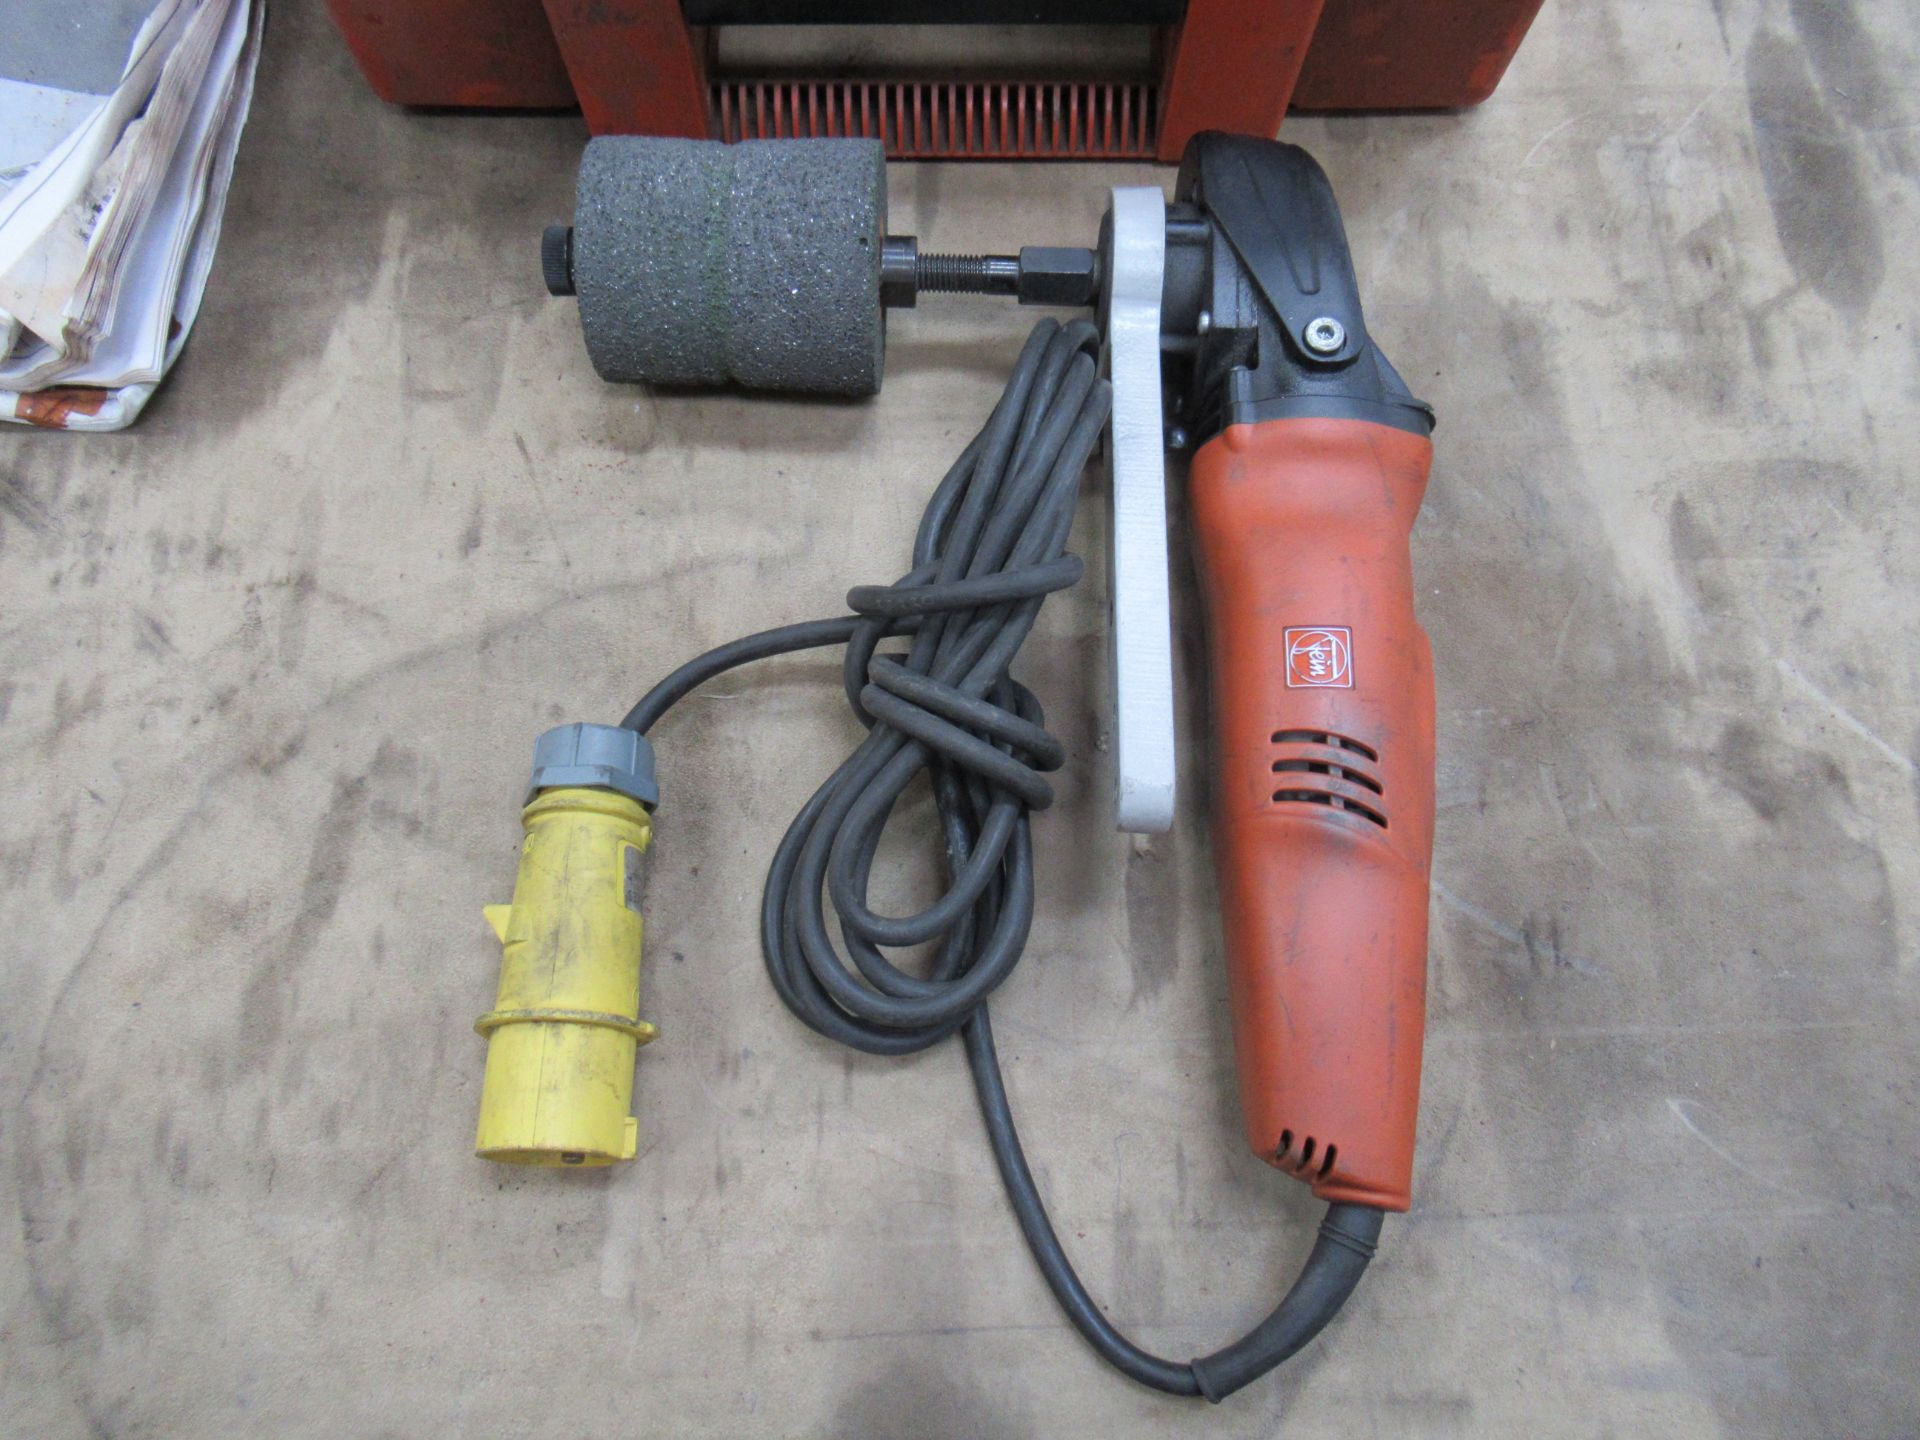 A Fein 110V Hand Sander/Polisher Multi-Tool with carry case - Image 2 of 4